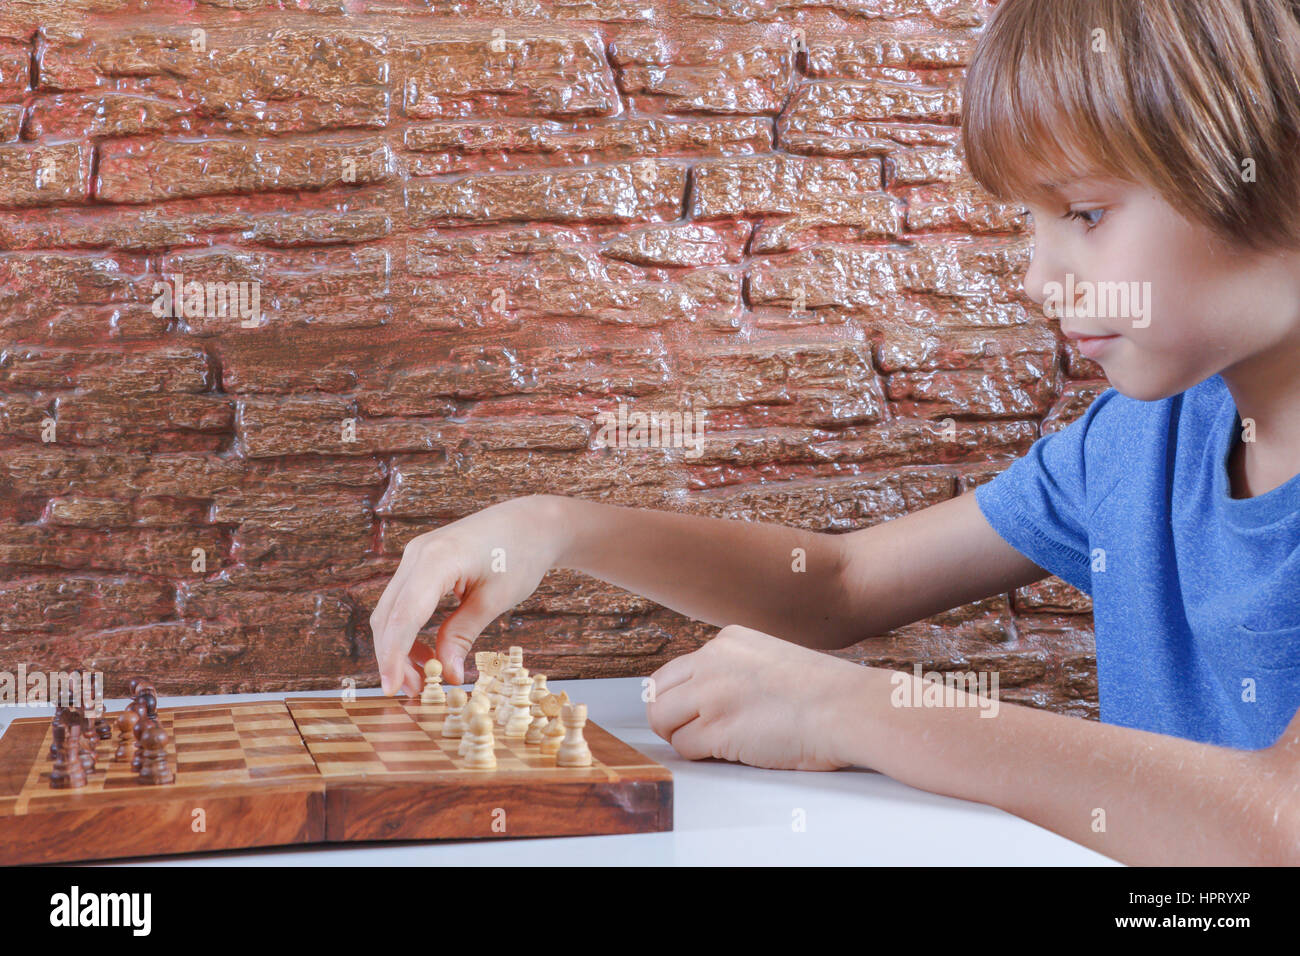 Children's Restraining Hand Thoughtfully Figure Before The Next Chess Move  Stock Photo, Picture and Royalty Free Image. Image 77247675.